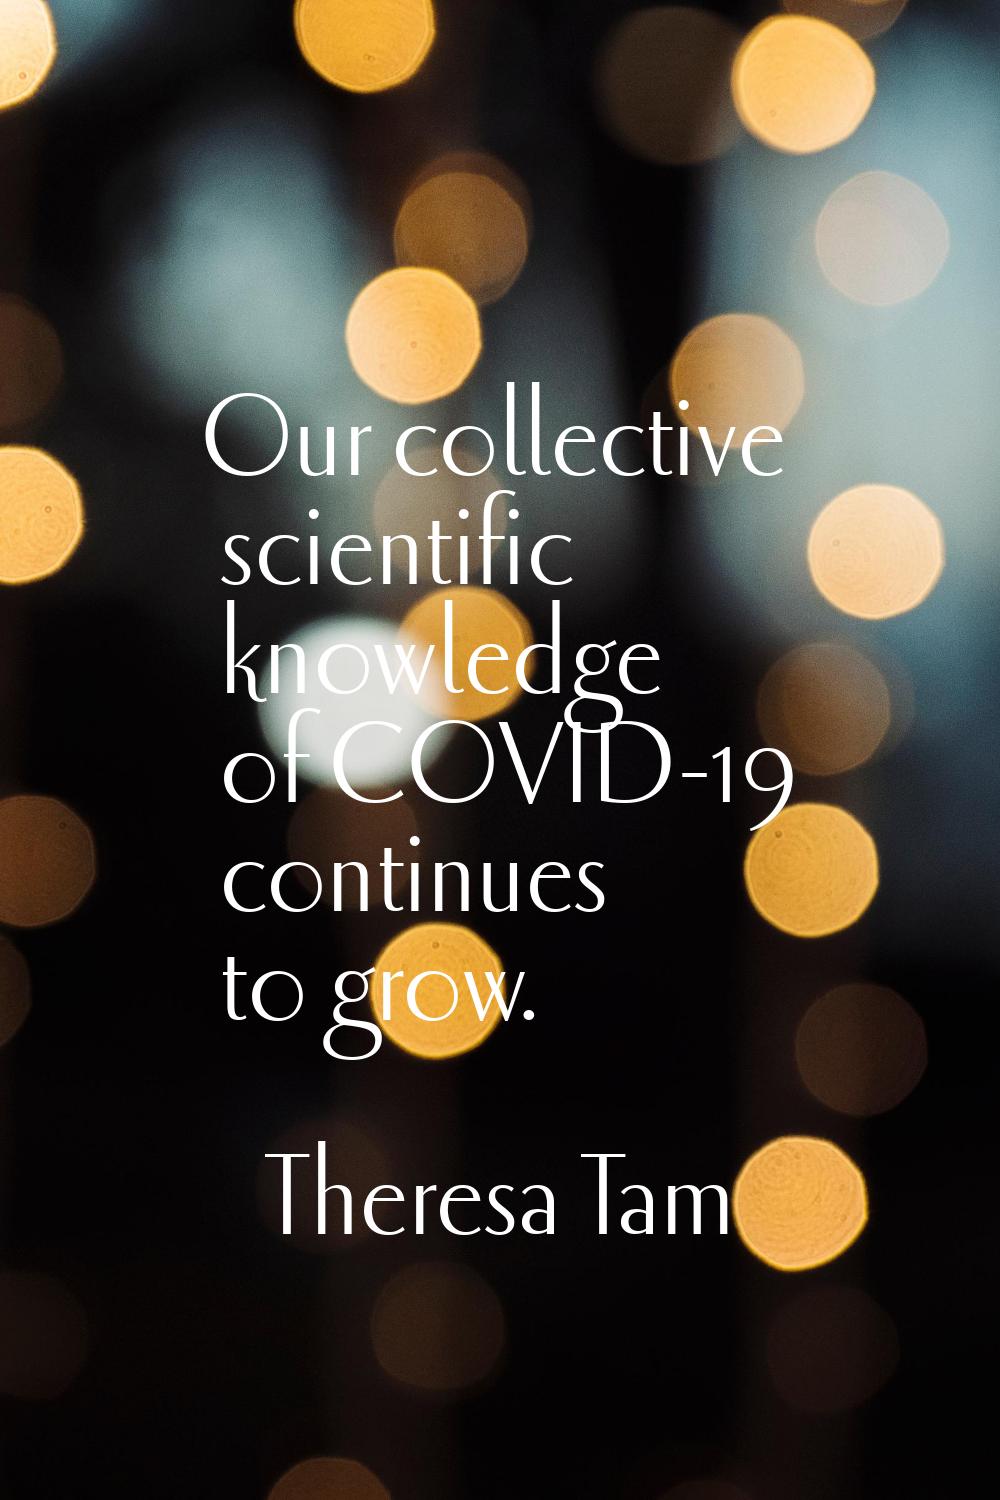 Our collective scientific knowledge of COVID-19 continues to grow.